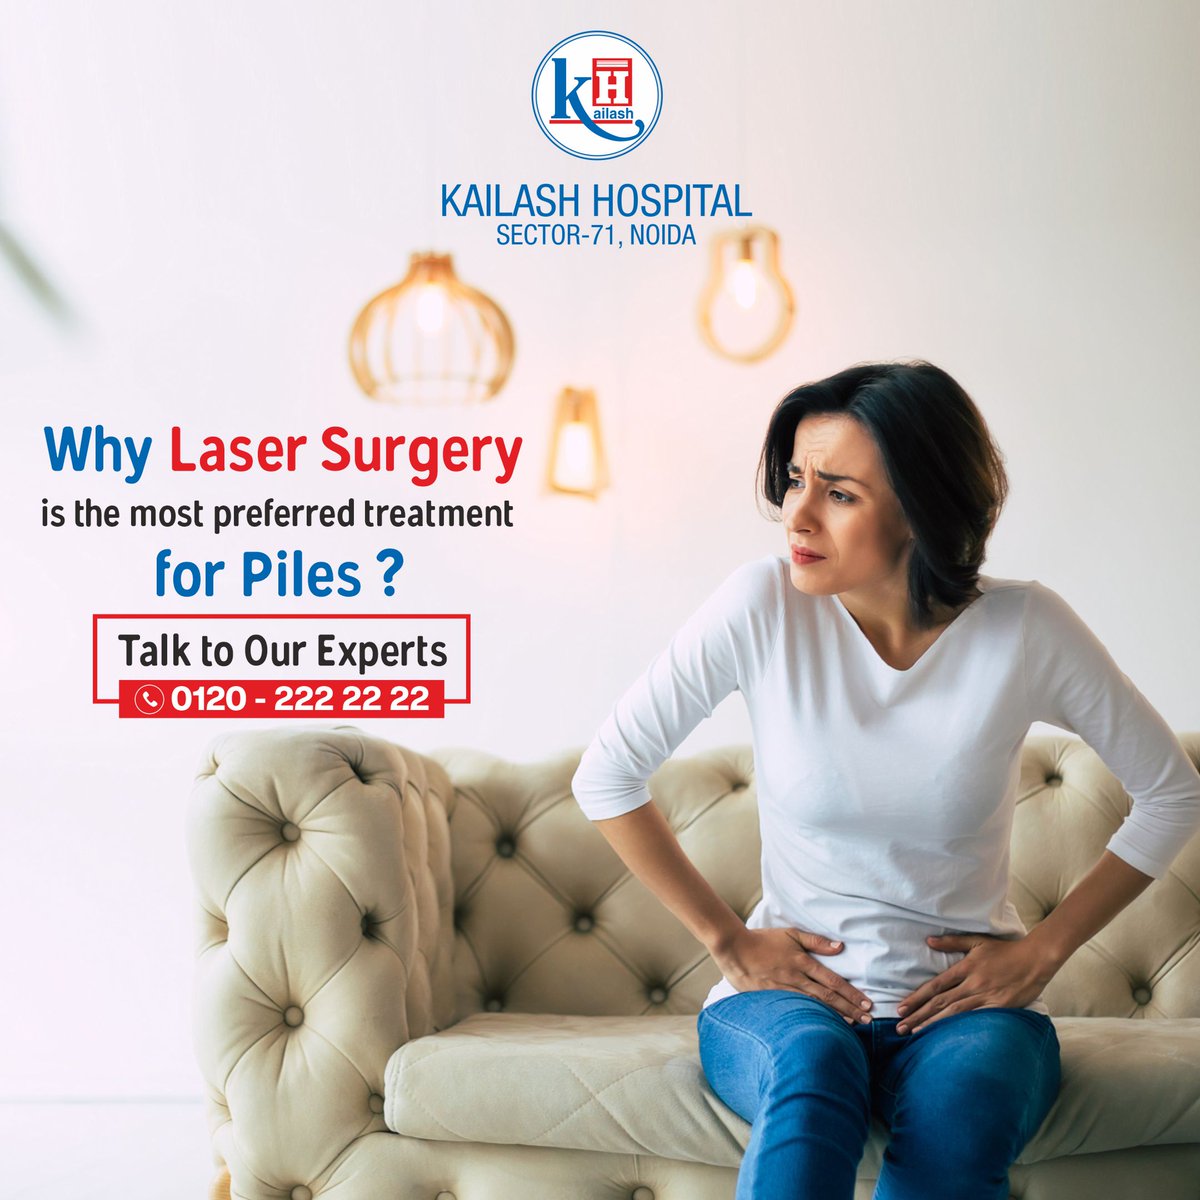 Tired of dealing with the discomfort and pain of Piles?
Laser surgery, the most preferred treatment for piles available at Kailash Hospital, Sector 71, Noida.
To consult our experts, call : 0120 2222222

#piles #pilestreatment #PilesSurgery #pilesproblem #lasersurgery…